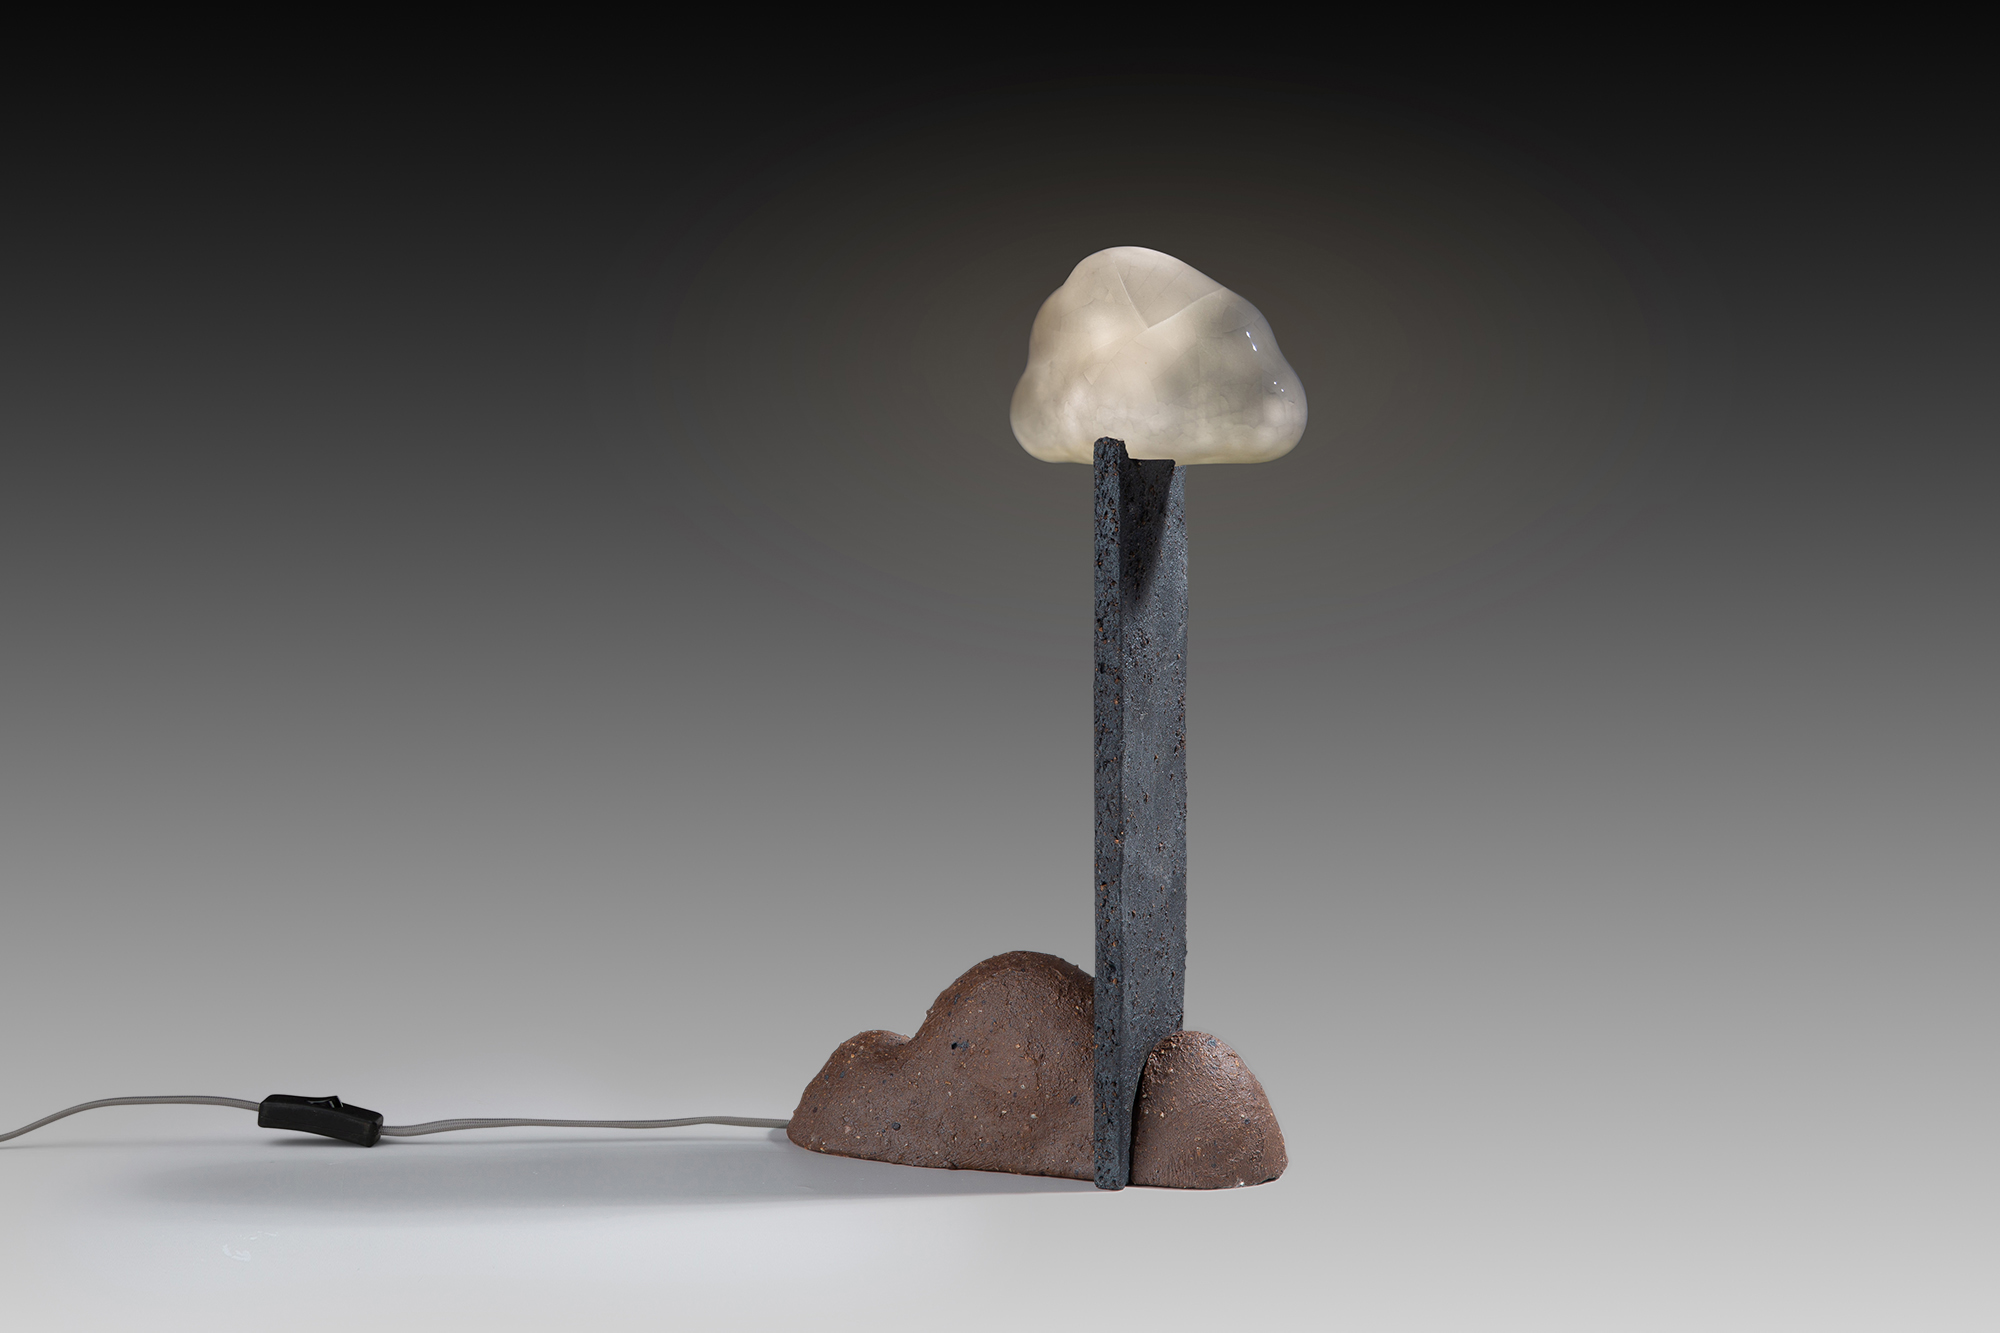 Sculptural lamp with electrical cord, brown cloud-shaped base, flat pillar, and white cloud light.